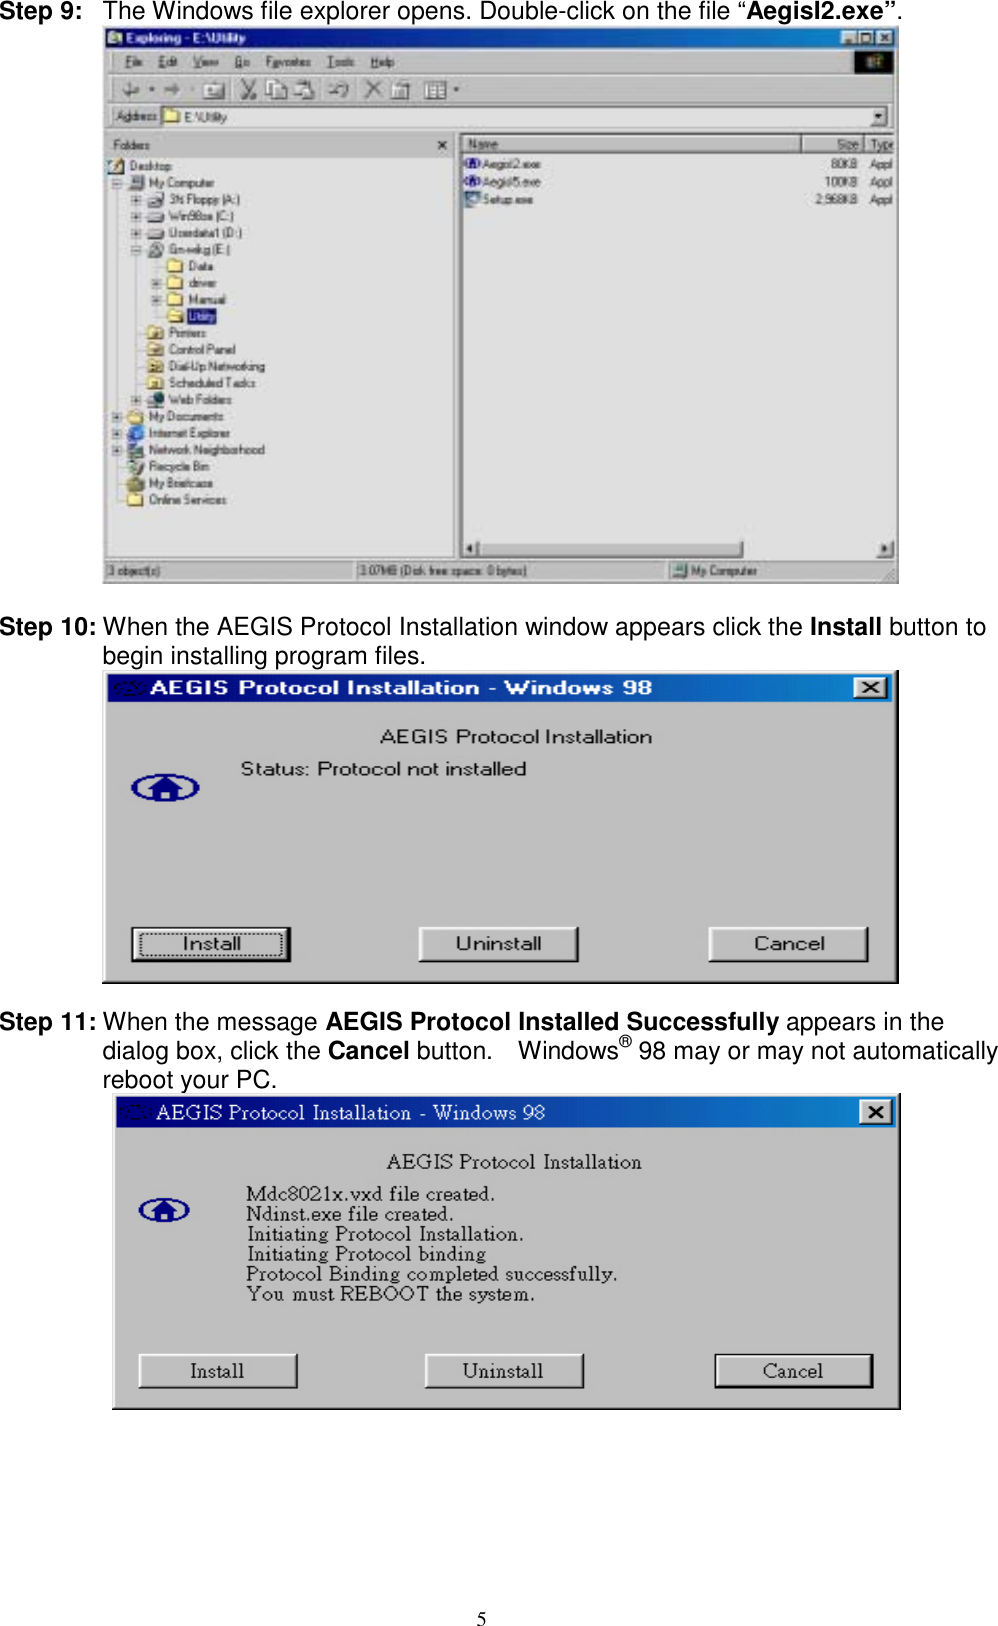 5  Step 9:  The Windows file explorer opens. Double-click on the file “AegisI2.exe”.   Step 10: When the AEGIS Protocol Installation window appears click the Install button to begin installing program files.   Step 11: When the message AEGIS Protocol Installed Successfully appears in the dialog box, click the Cancel button.    Windows® 98 may or may not automatically reboot your PC.    